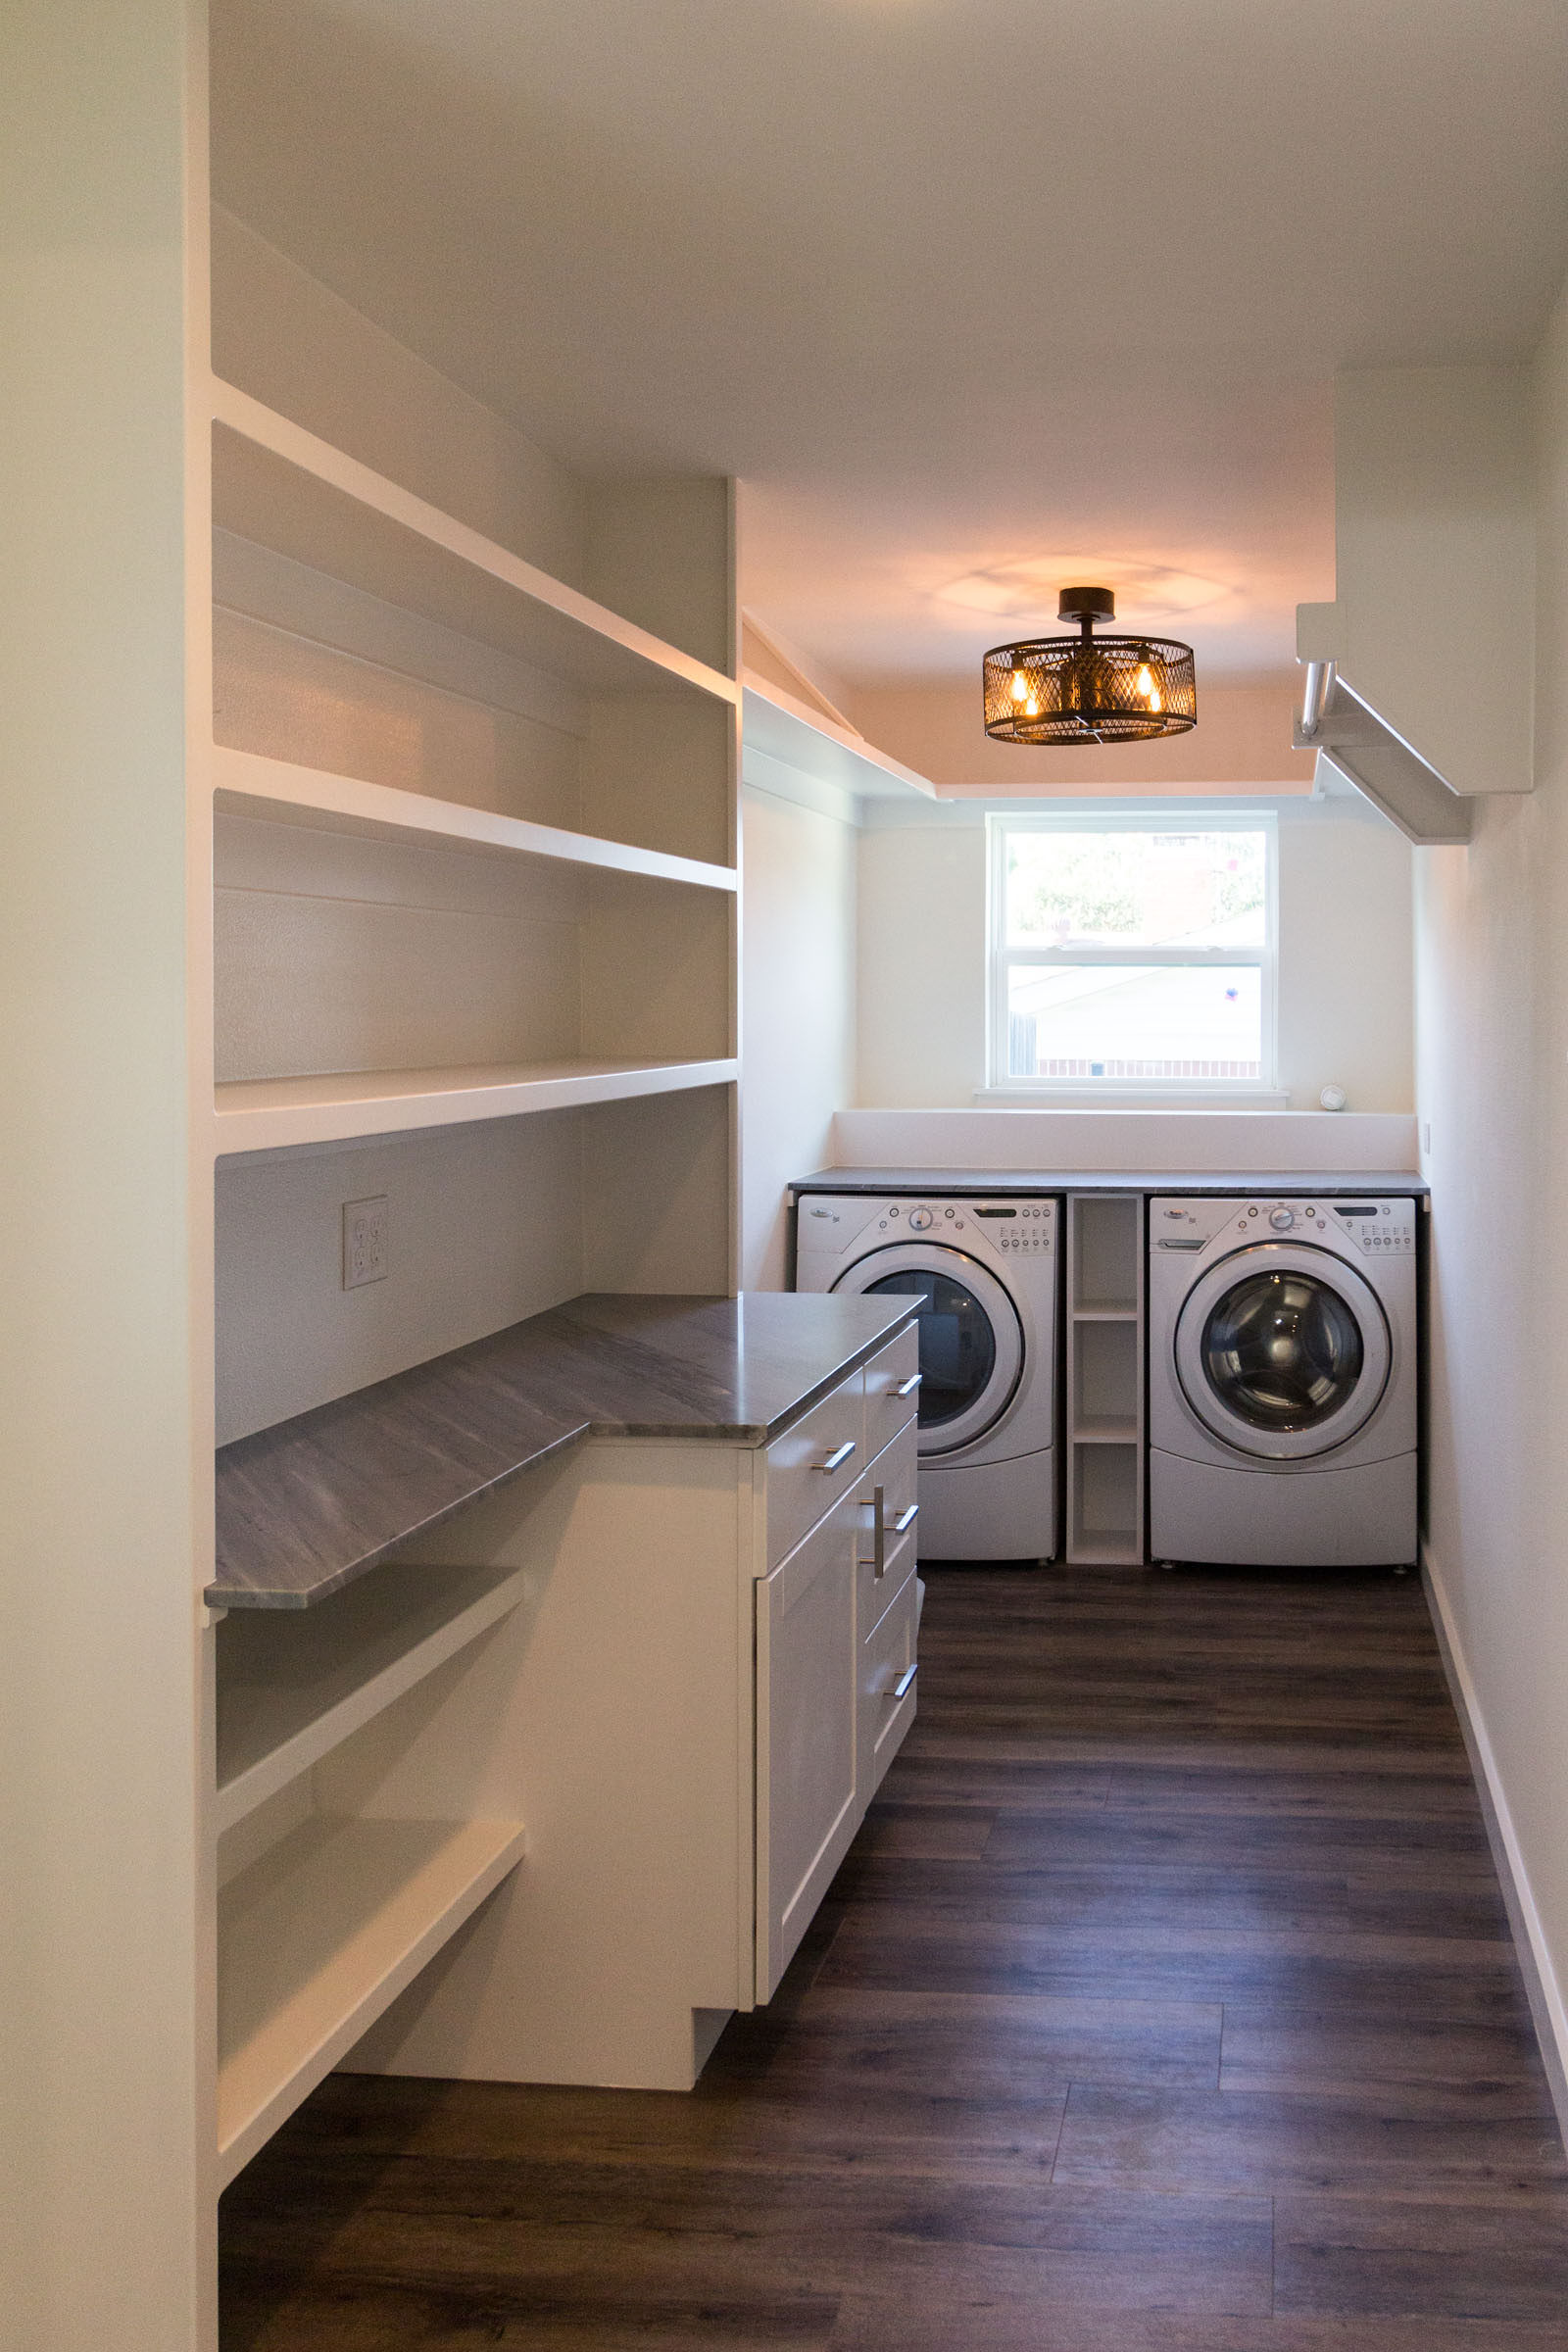 Laundry room built in shelves with folding counter and wood floors